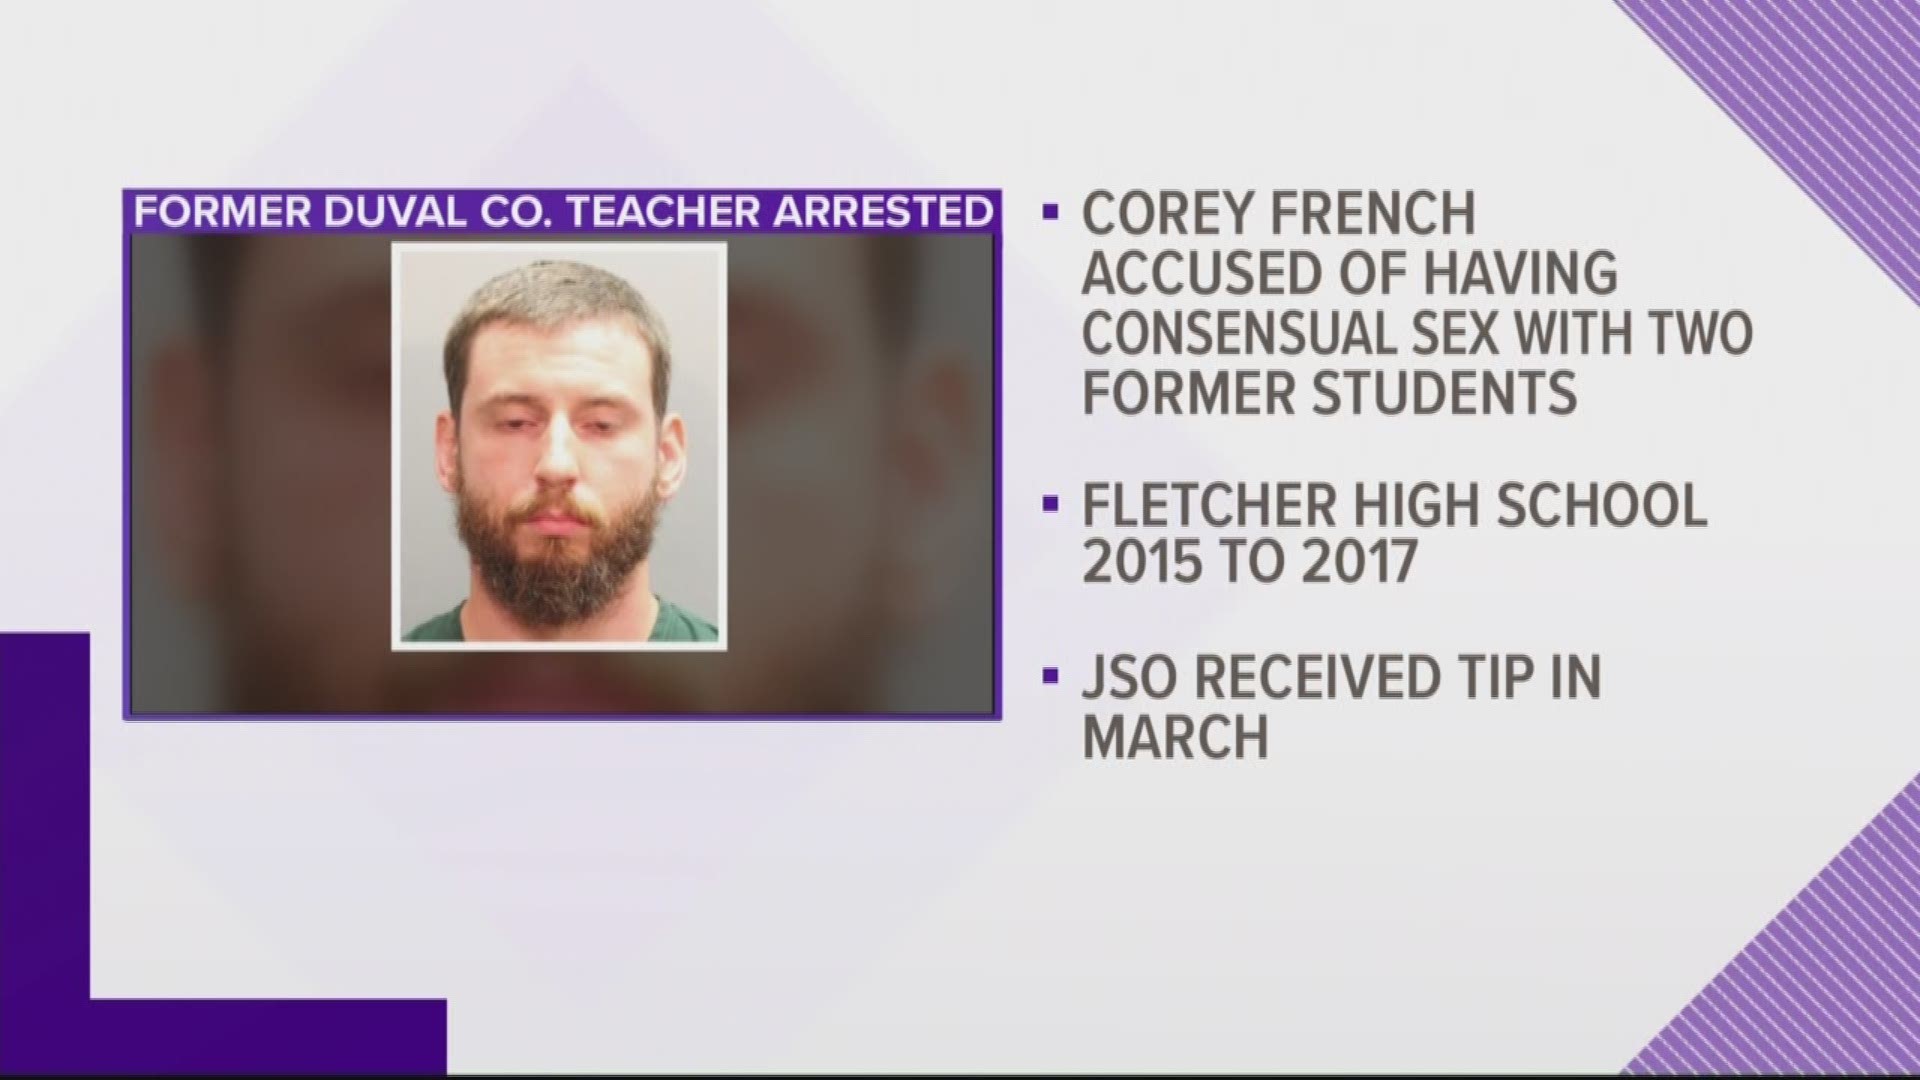 Former Fletcher High School teacher Corey French has been arrested Friday after having alleged consensual sexual relations with students.